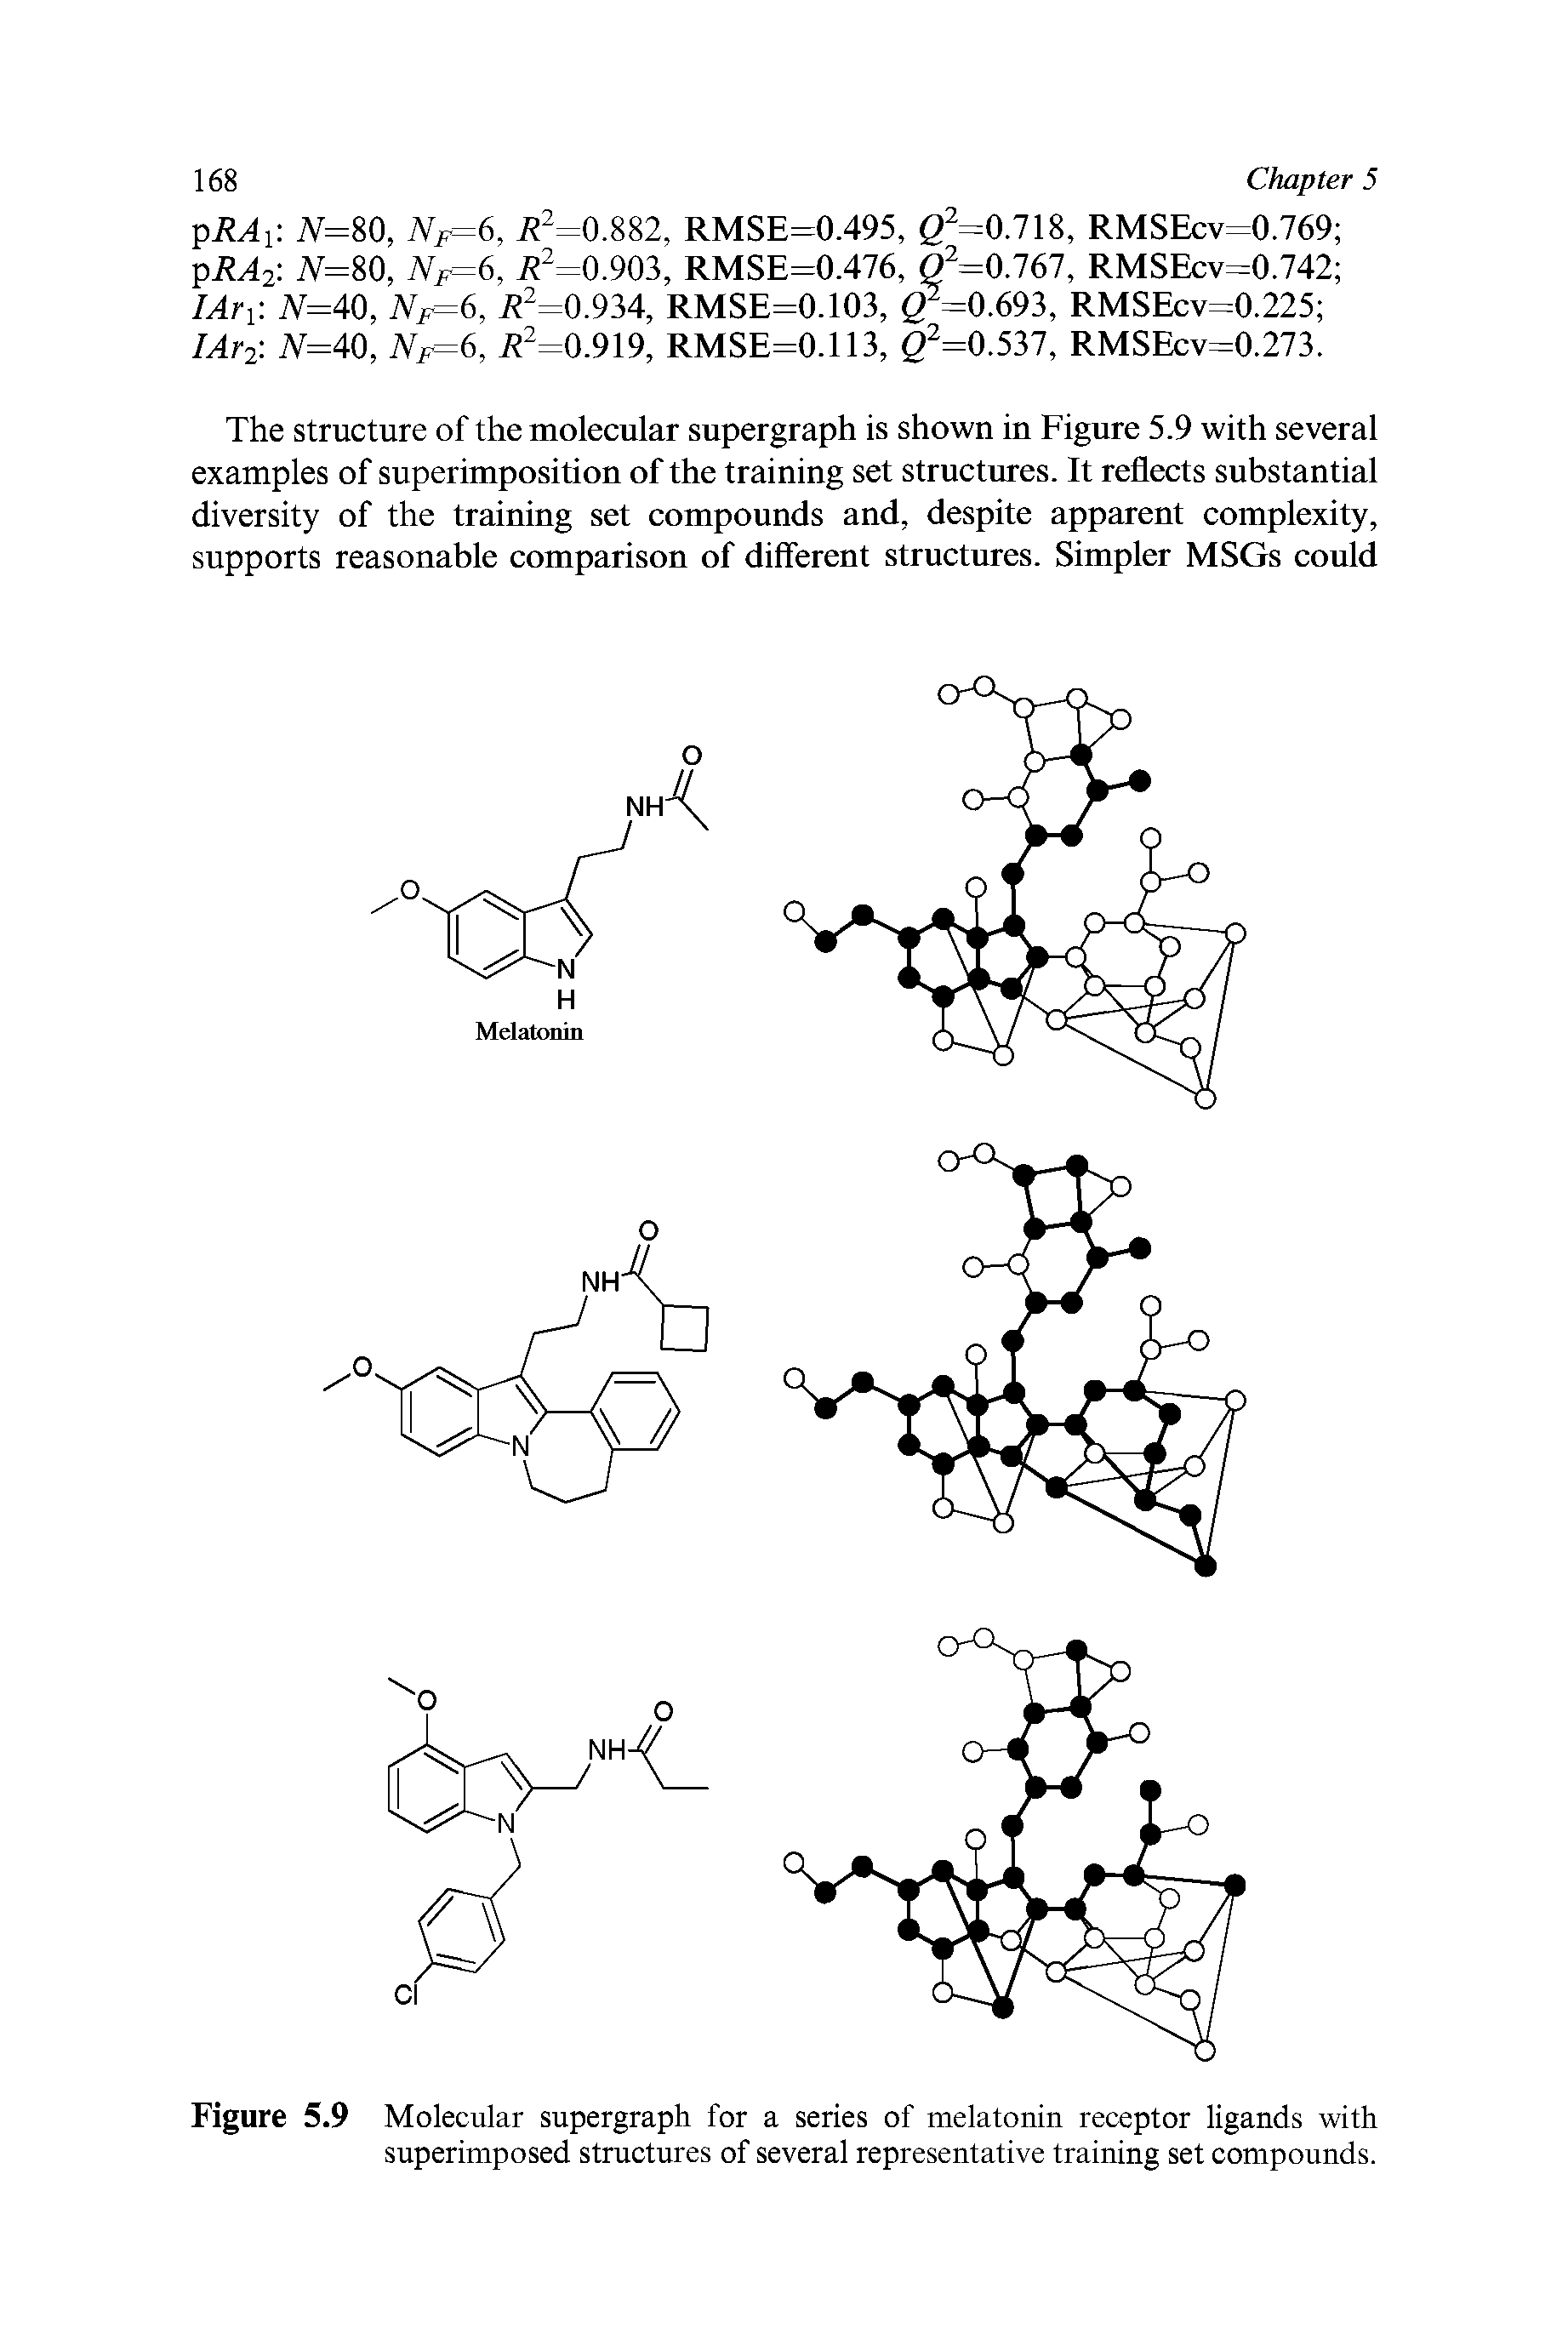 Figure 5.9 Molecular supergraph for a series of melatonin receptor ligands with superimposed structures of several representative training set compounds.